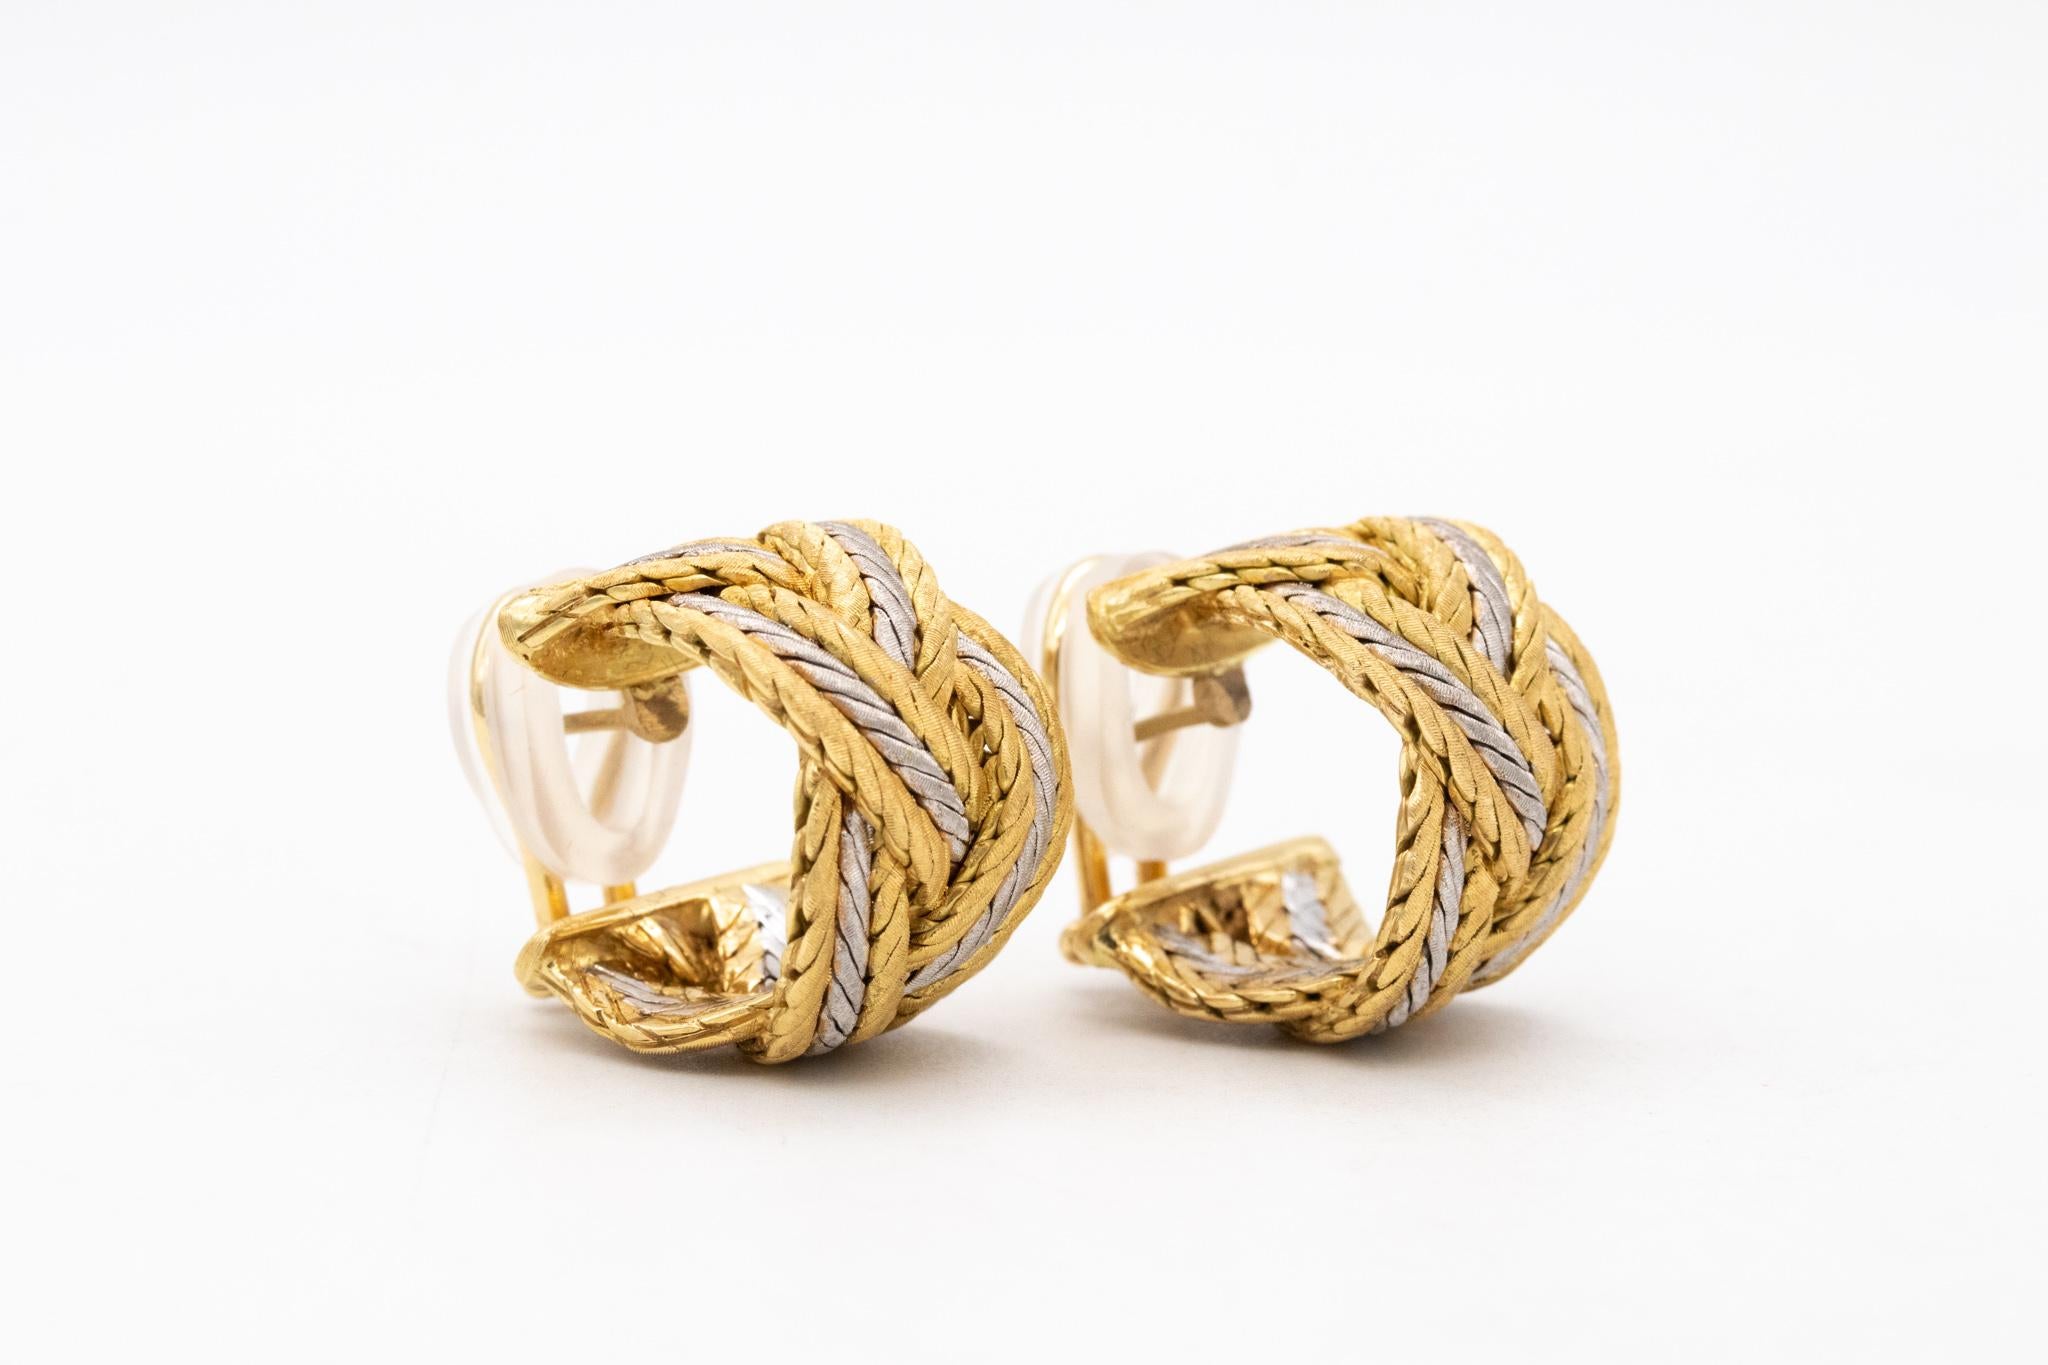 Buccellati Milano Large Hoops Earrings in Woven Textured 18Kt Yellow White Gold 2